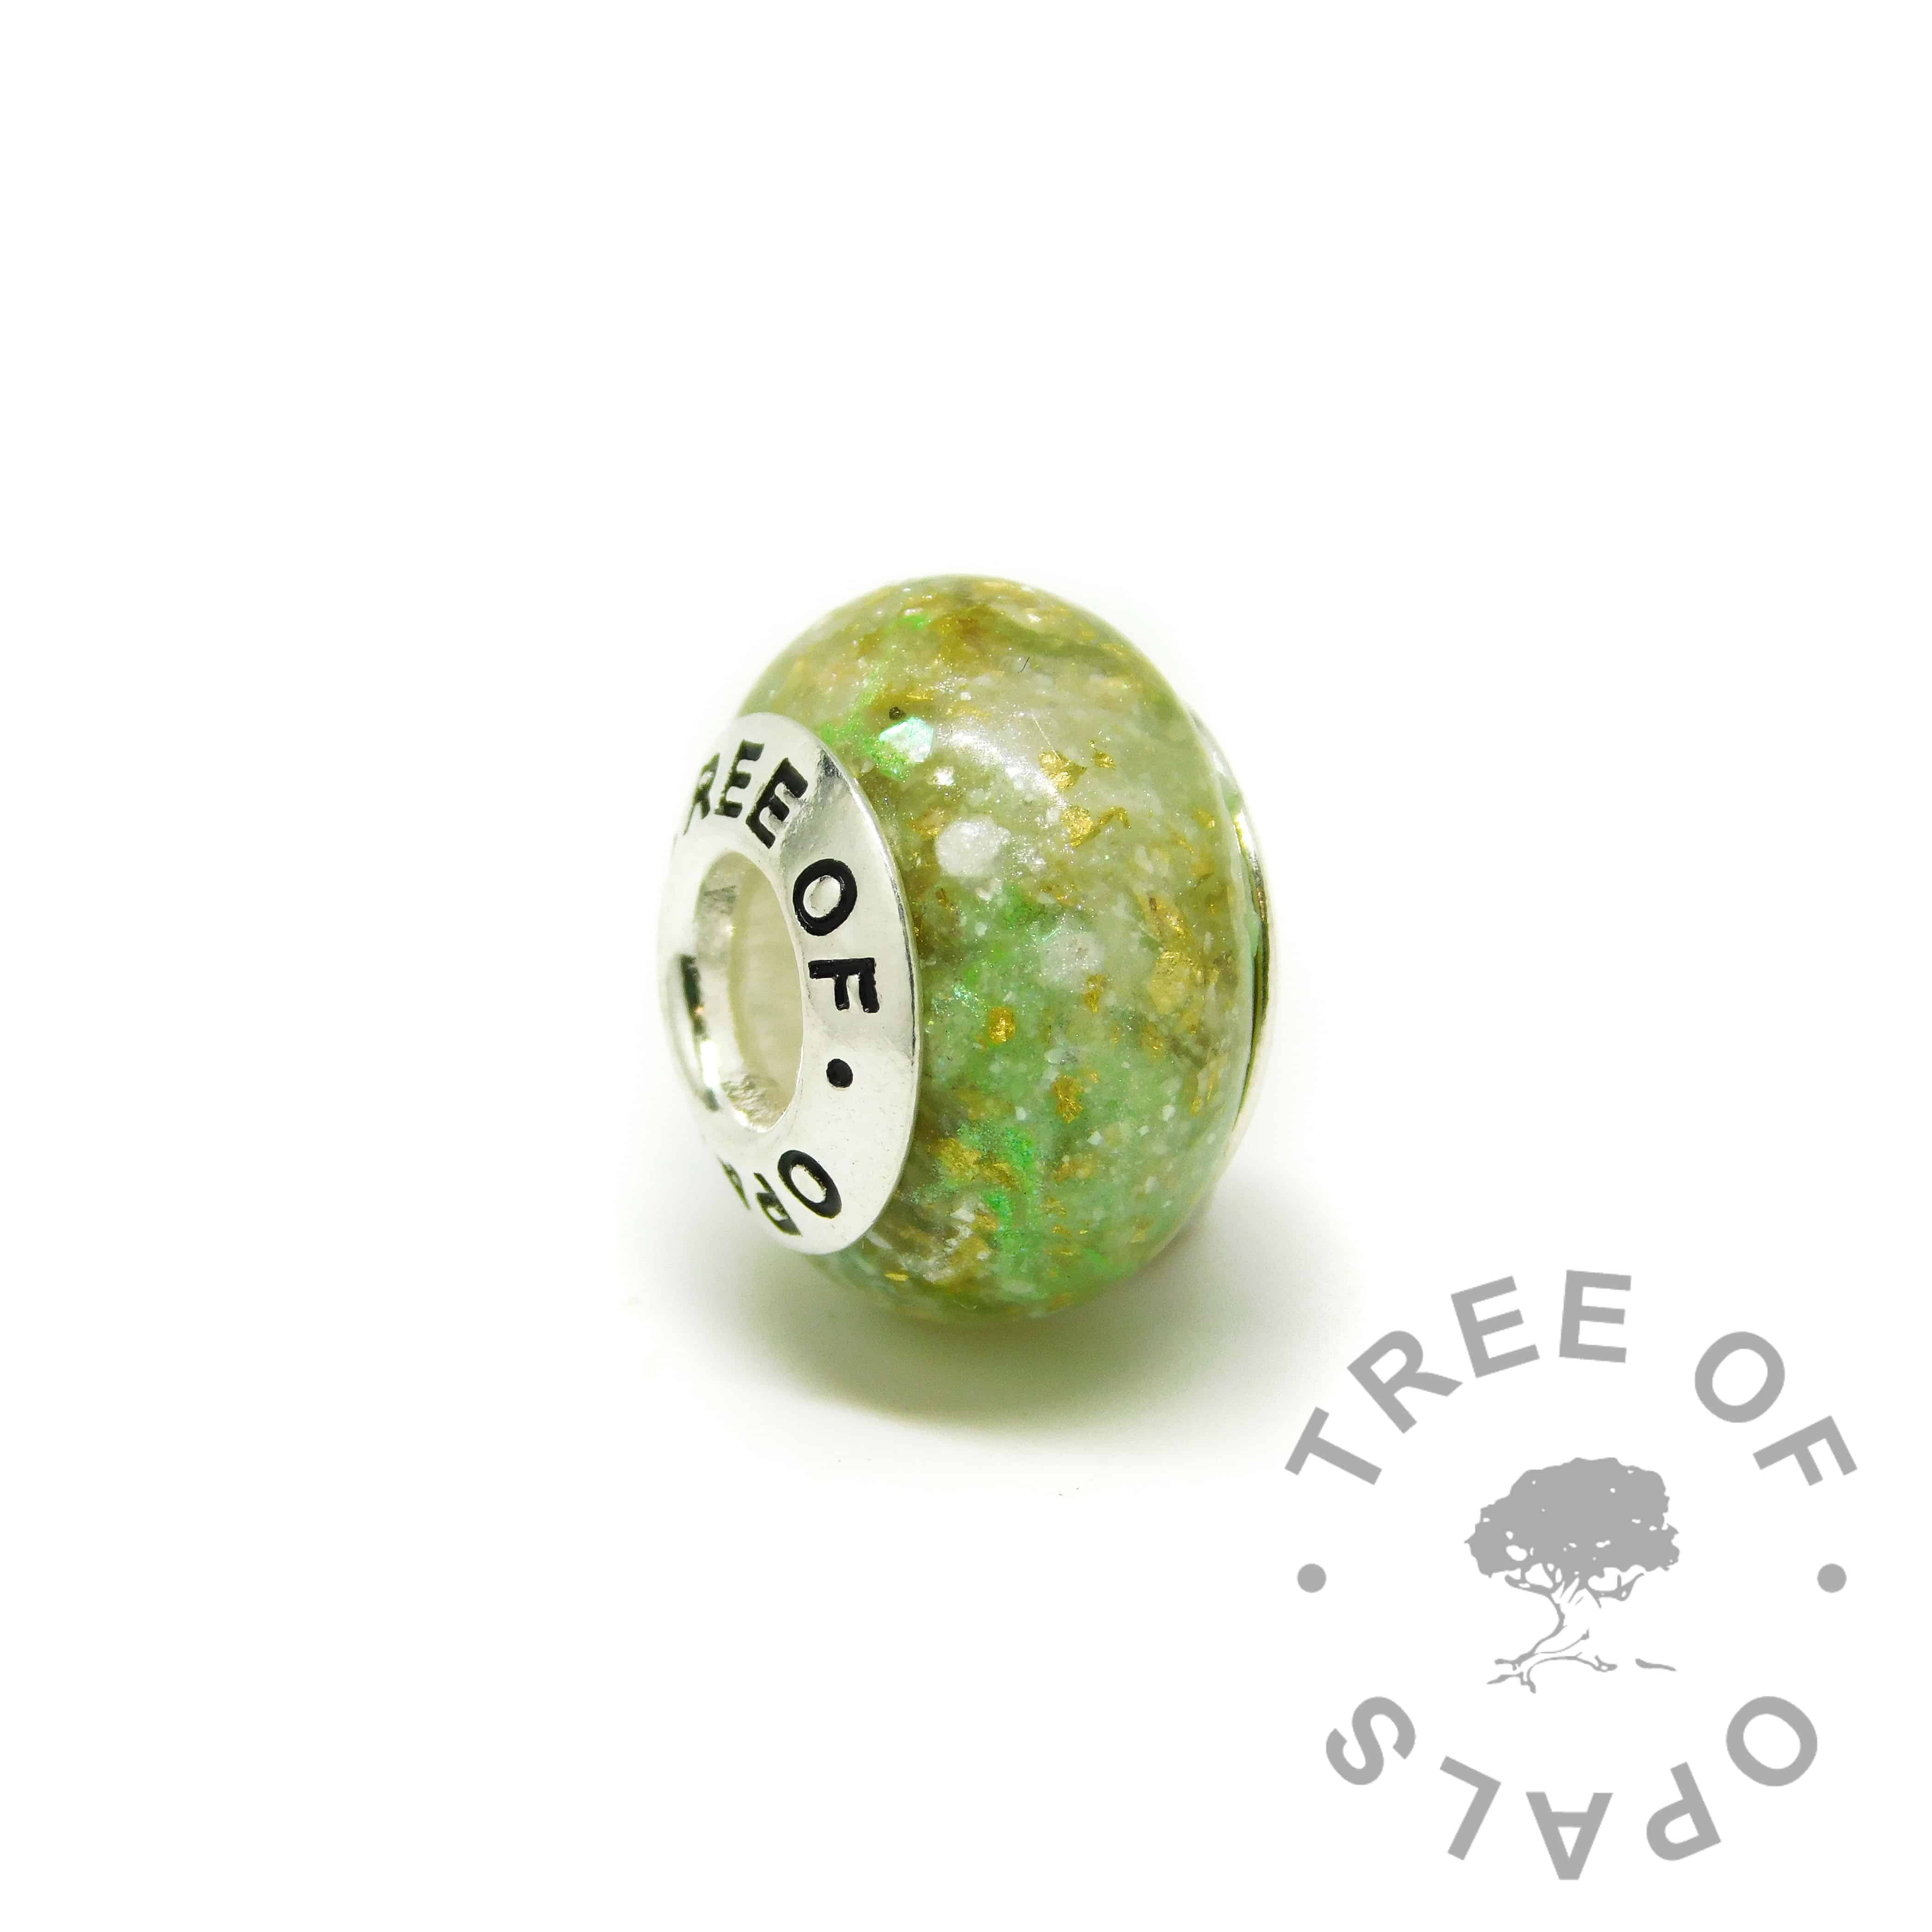 ashes charm with Tree of Opals core, basilisk green resin sparkle mix and subtle gold leaf. cremation ashes charm bead